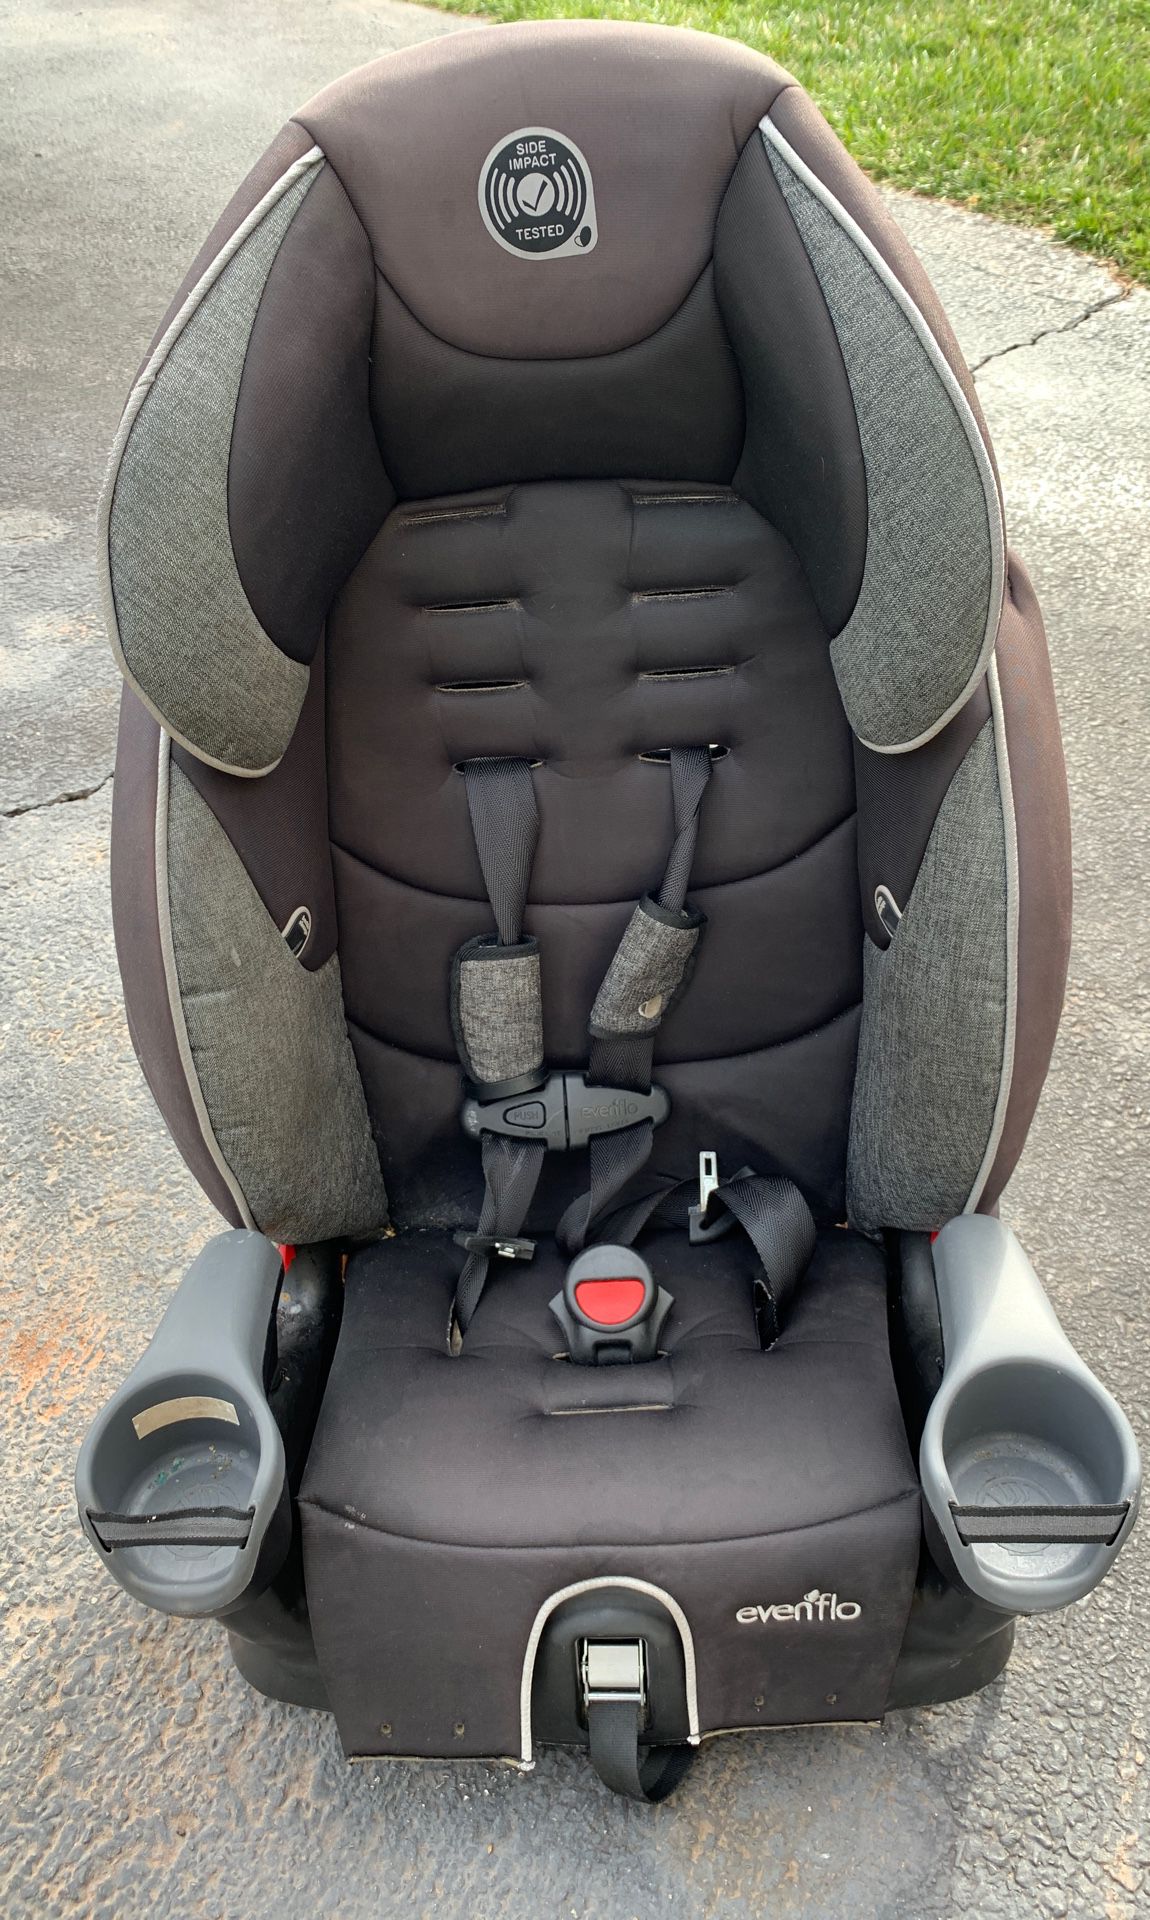 Evenflo car seat/booster seat